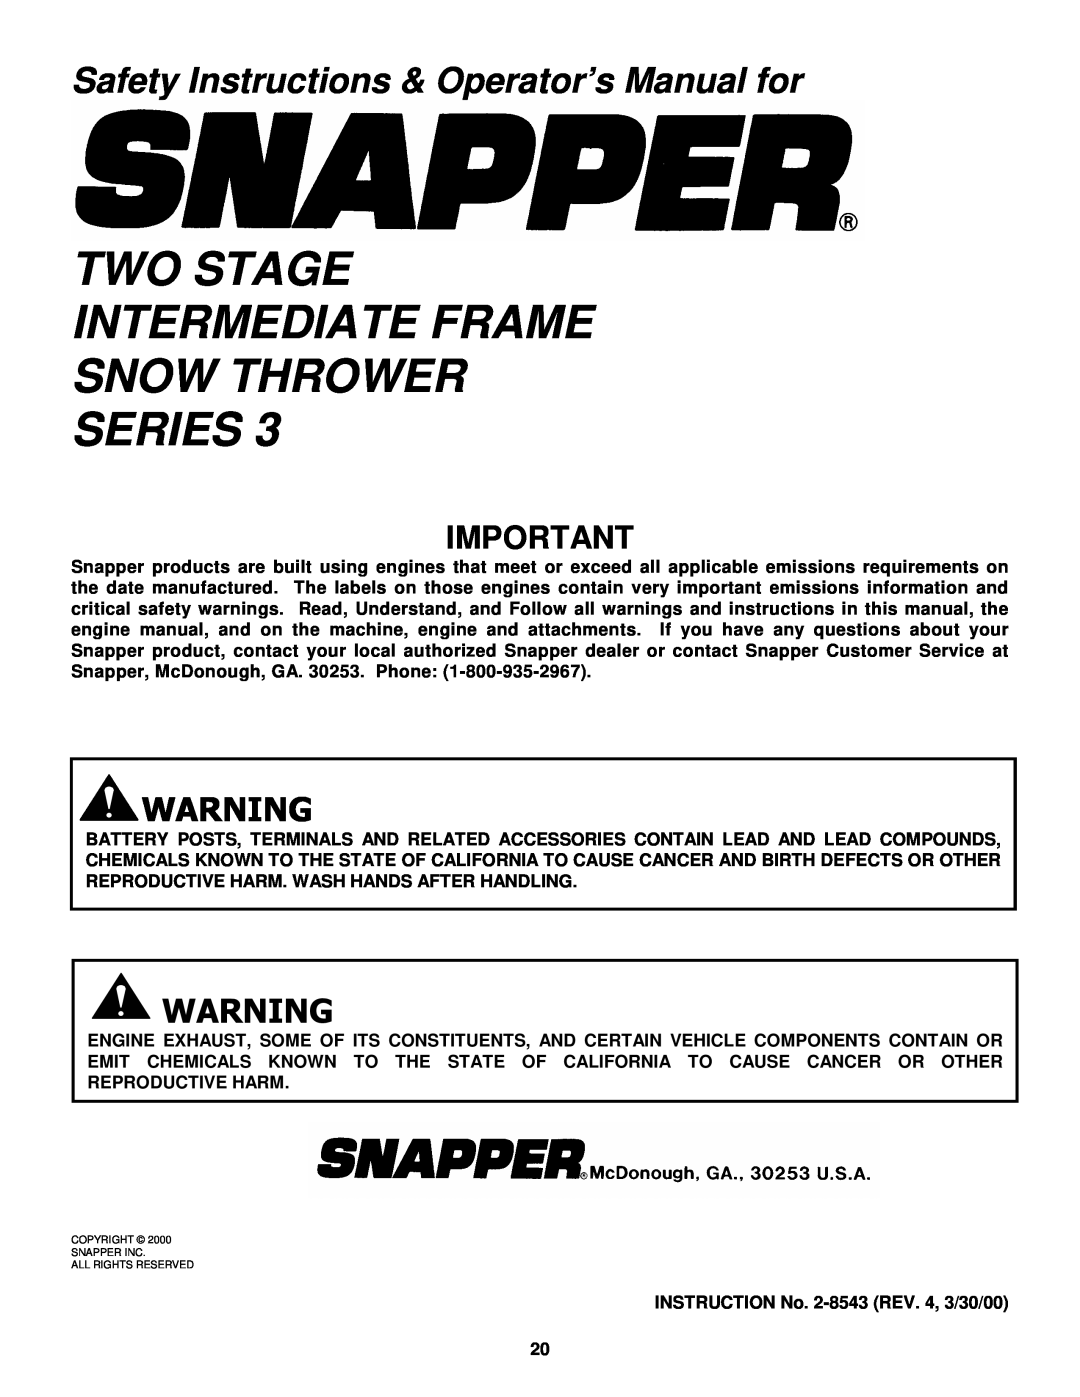 Snapper I55223, I7243 Two Stage Intermediate Frame Snow Thrower Series, Safety Instructions & Operator’s Manual for 